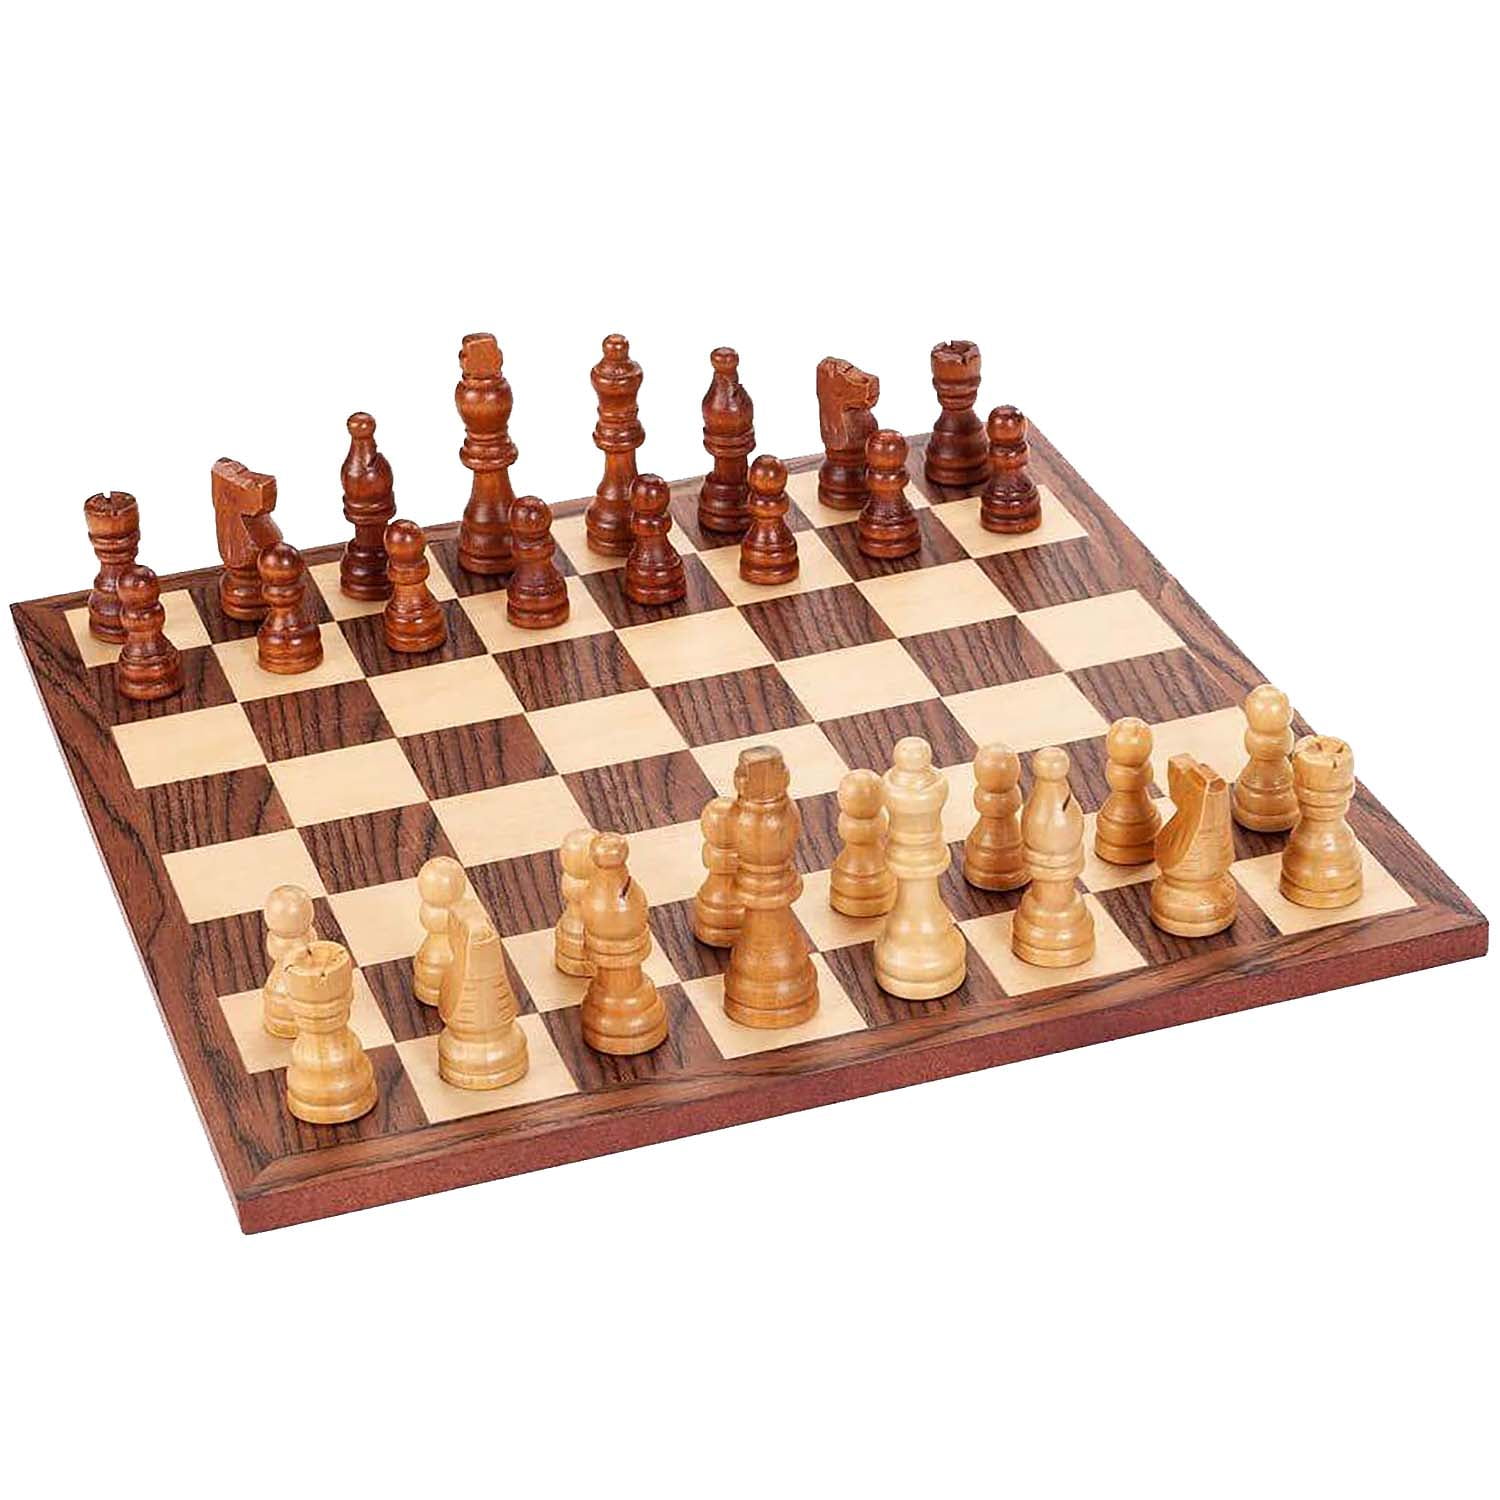 SOLID CHESS BOARD TRADITIONAL WOODEN CHESS BOARD BOXED PIECES APPROX 30CM 